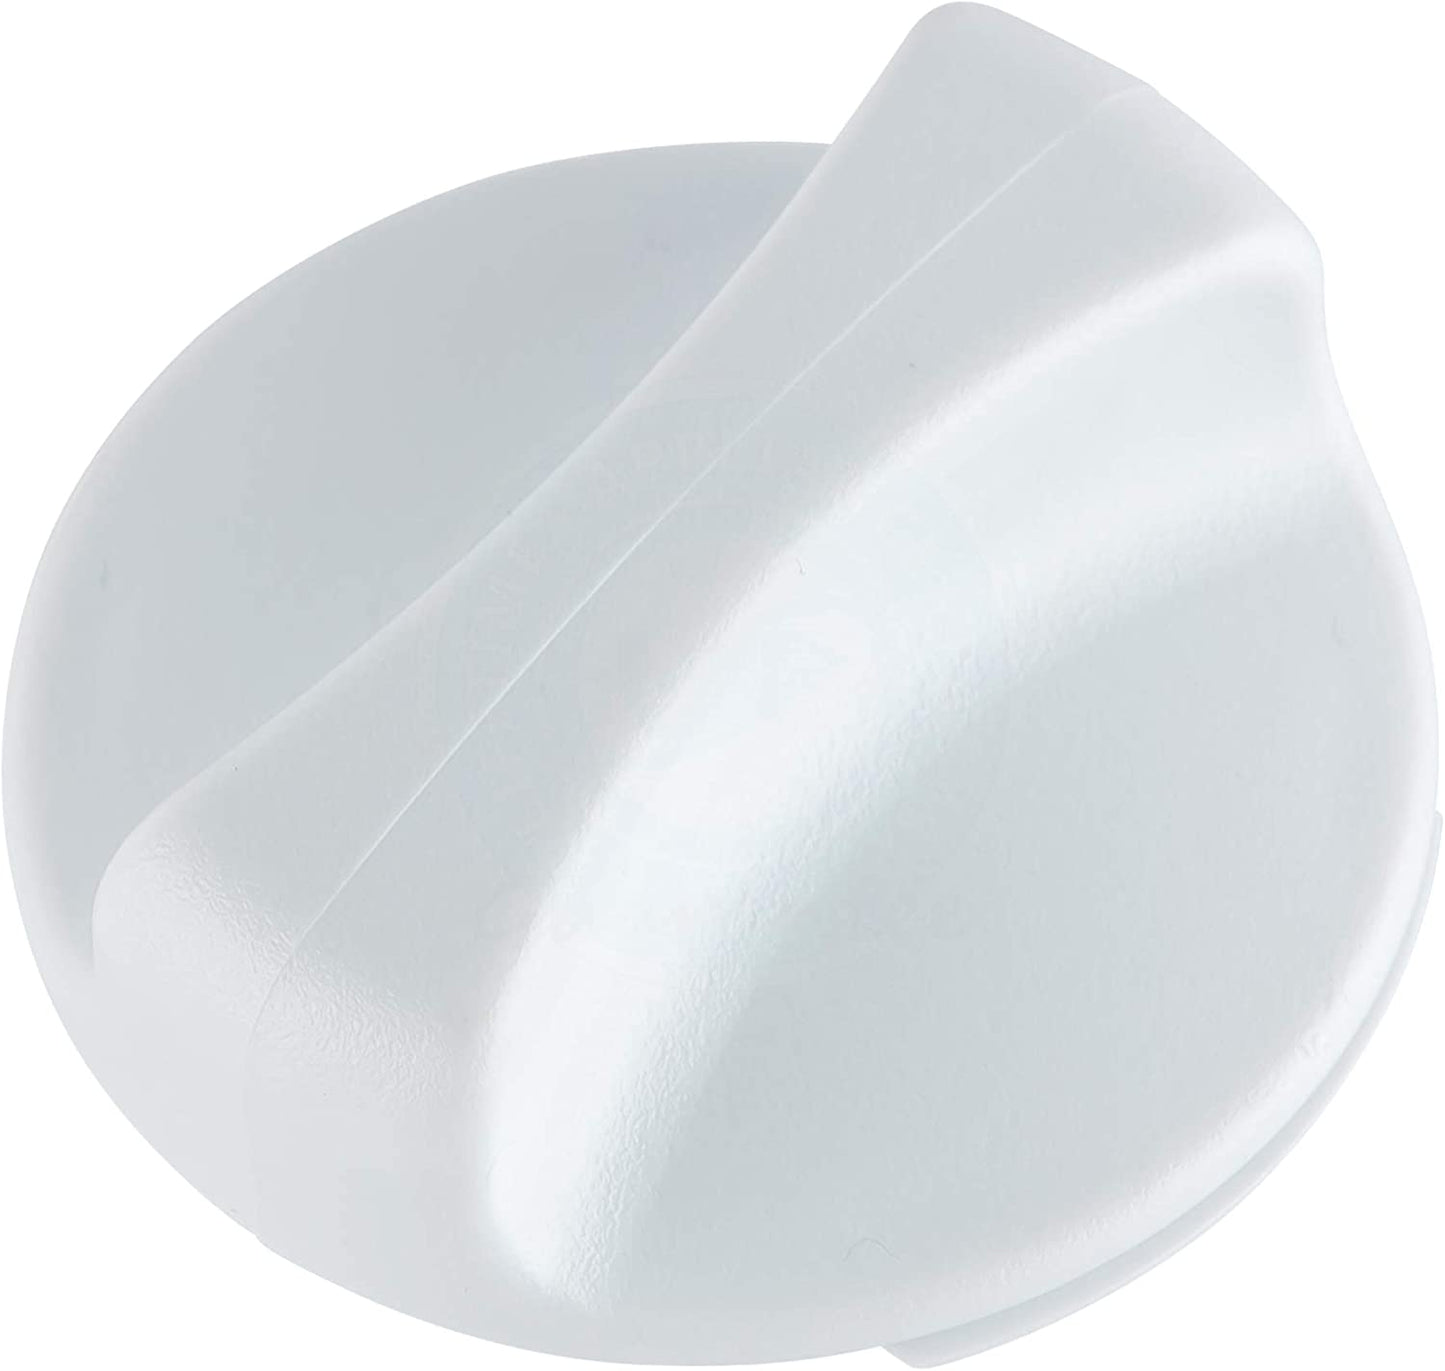 Lifetime Appliance 2186494W Water Filter Cap Compatible with Whirlpool Refrigerator